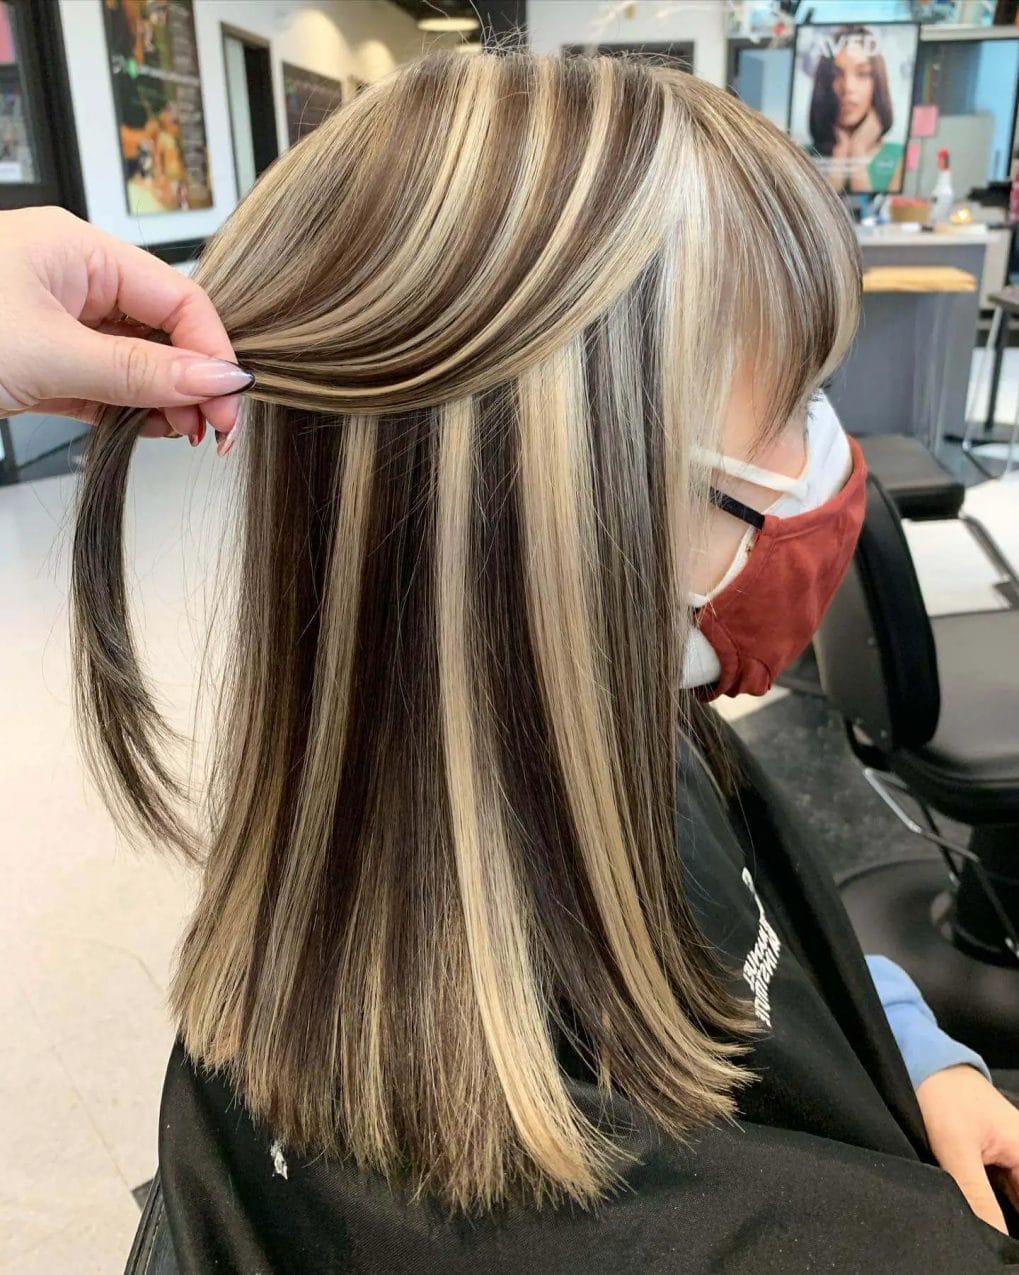 Mid-length cut with sandy blonde and light brown highlights against darker base.